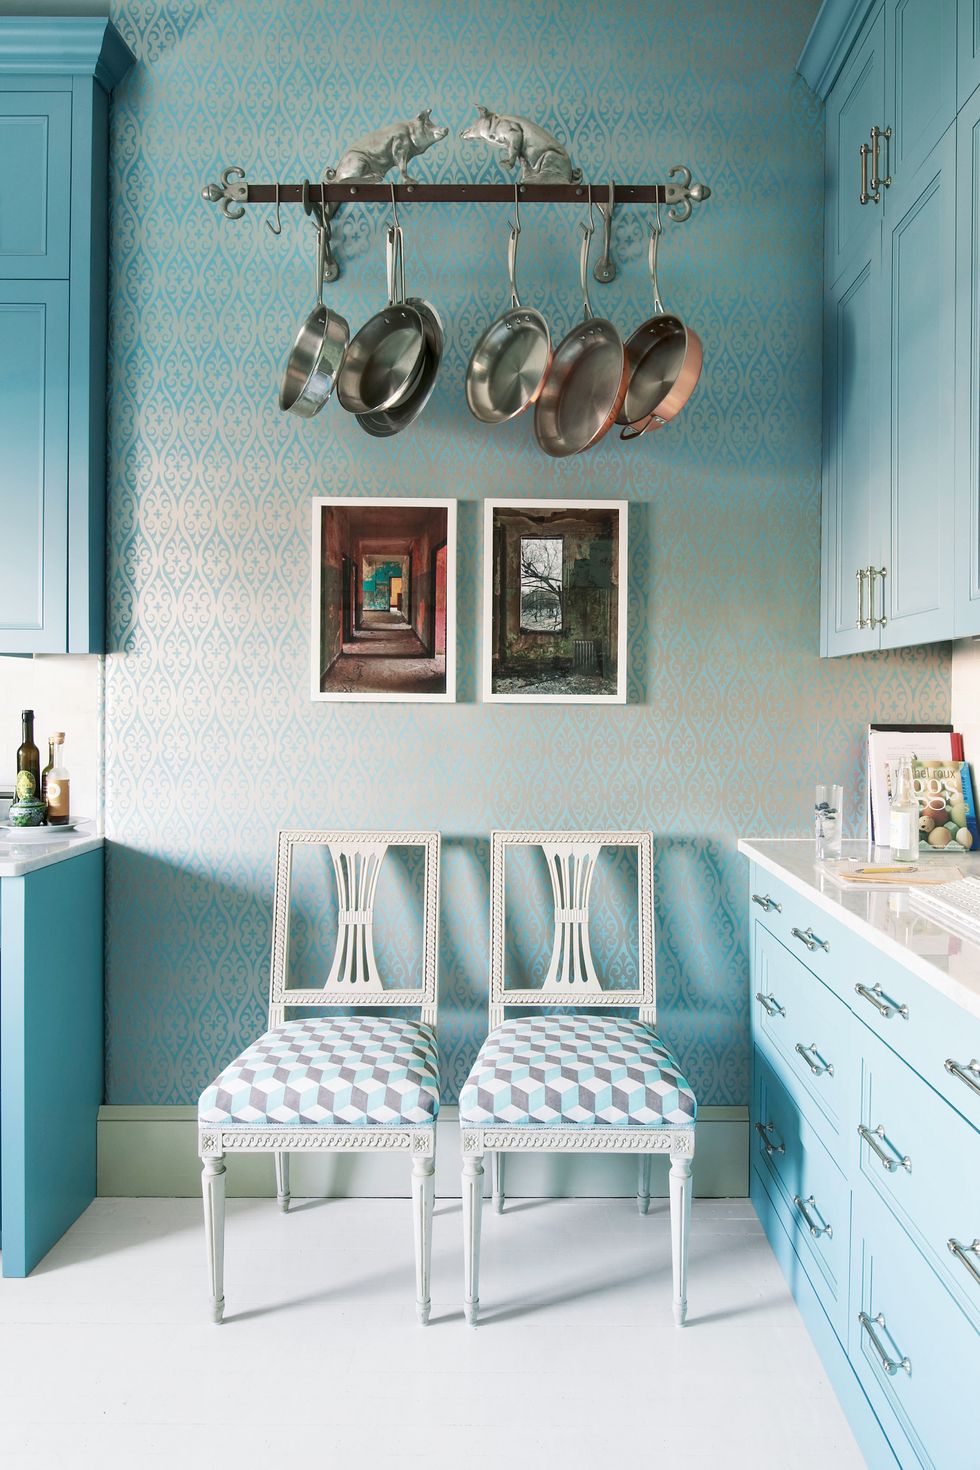 20 Easy Kitchen Wall Decor Ideas From Designer Rooms